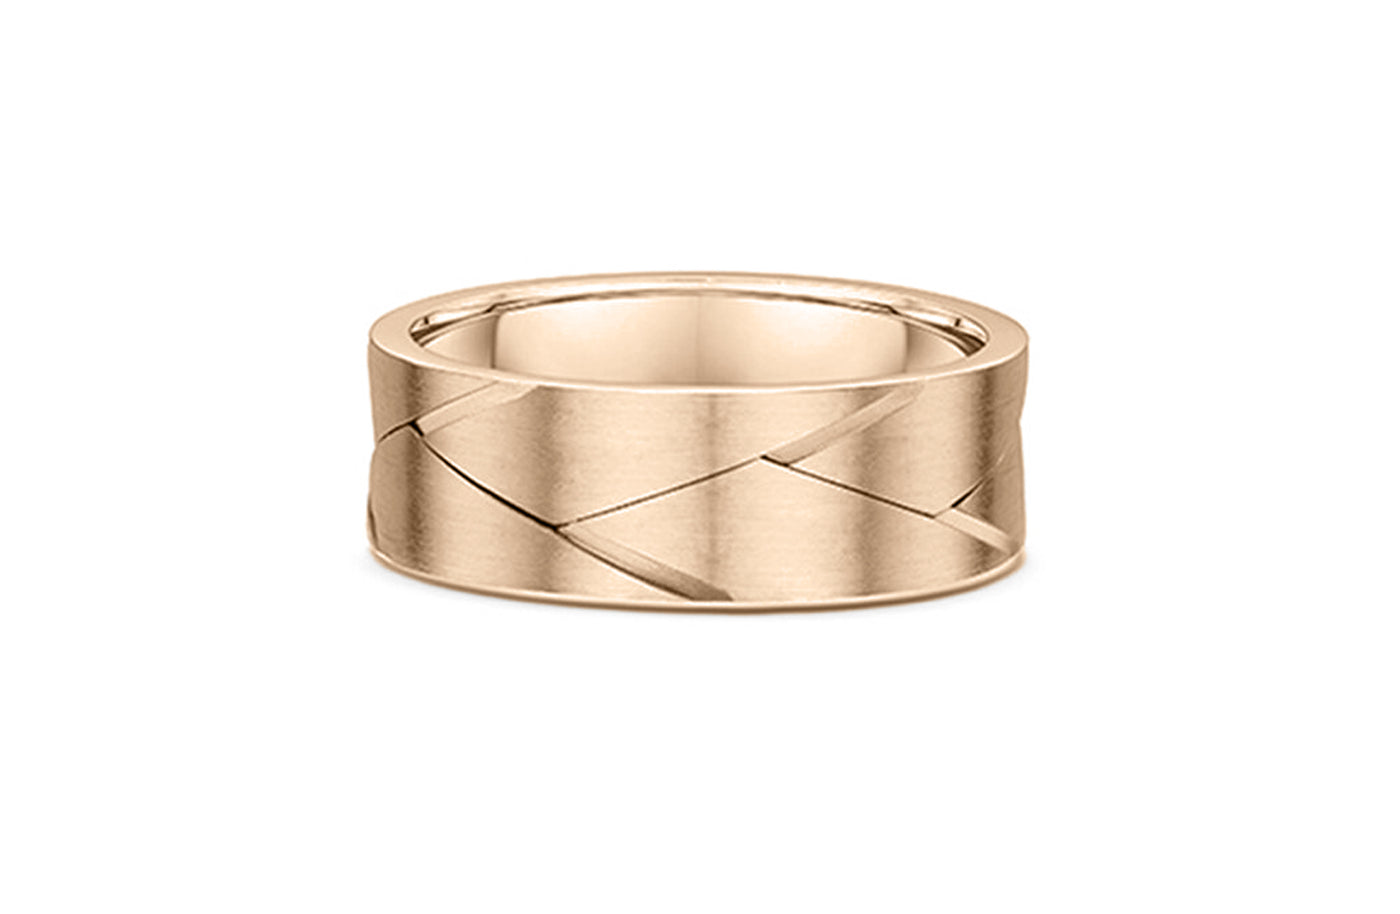 Carved Woven Pattern Brushed Finish Band in Rose Gold